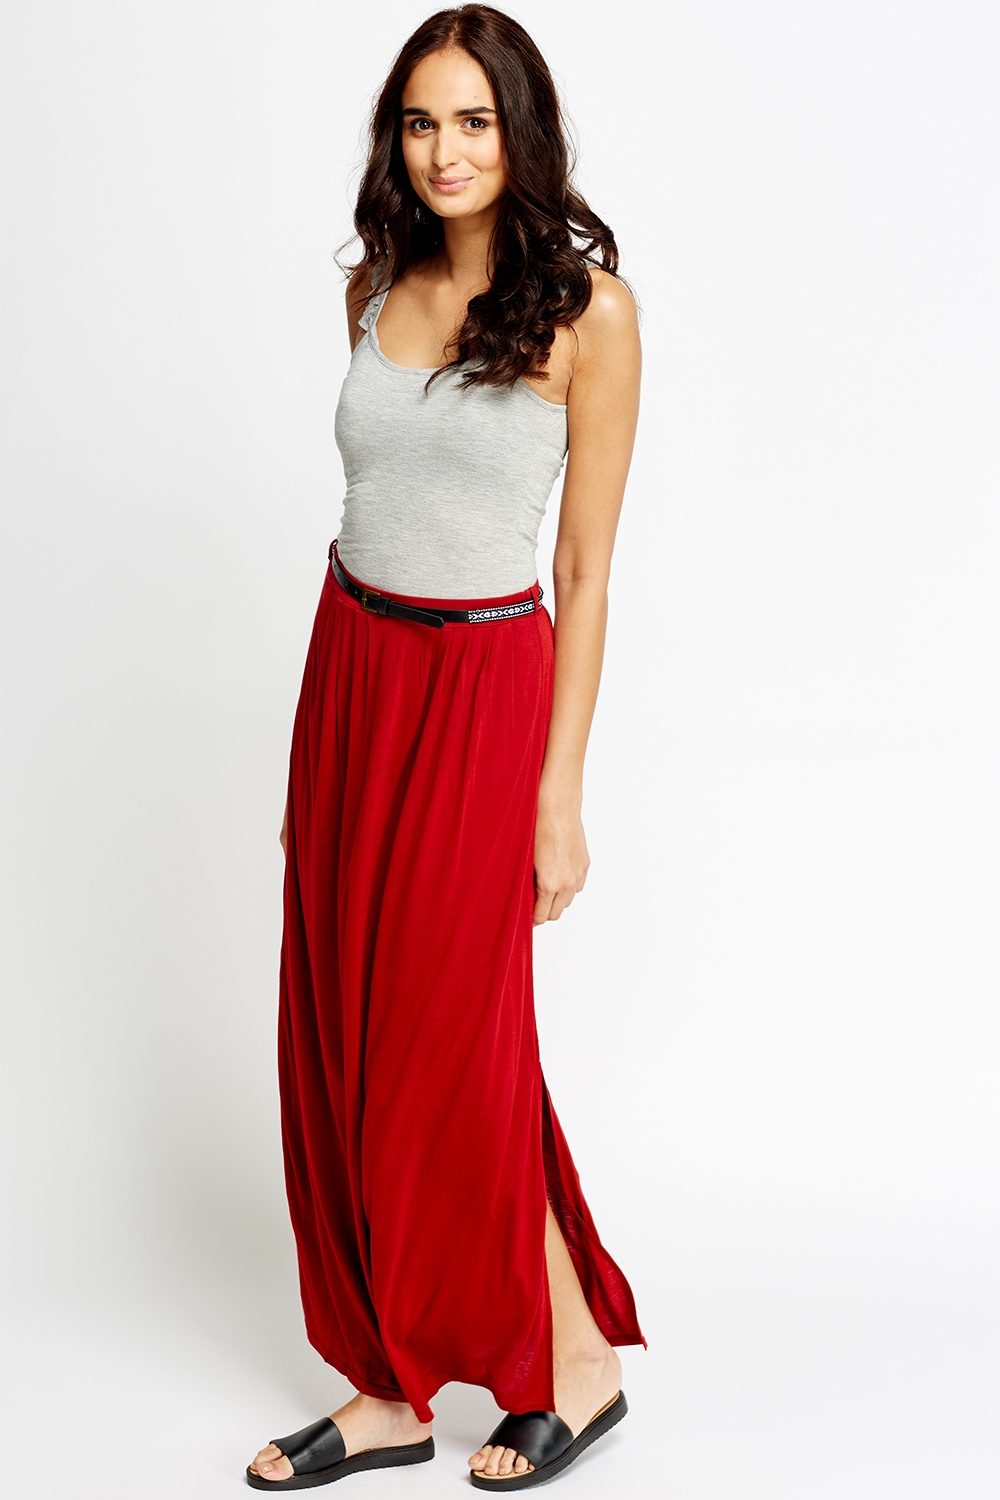 Red Long Belted Skirt - Just $7